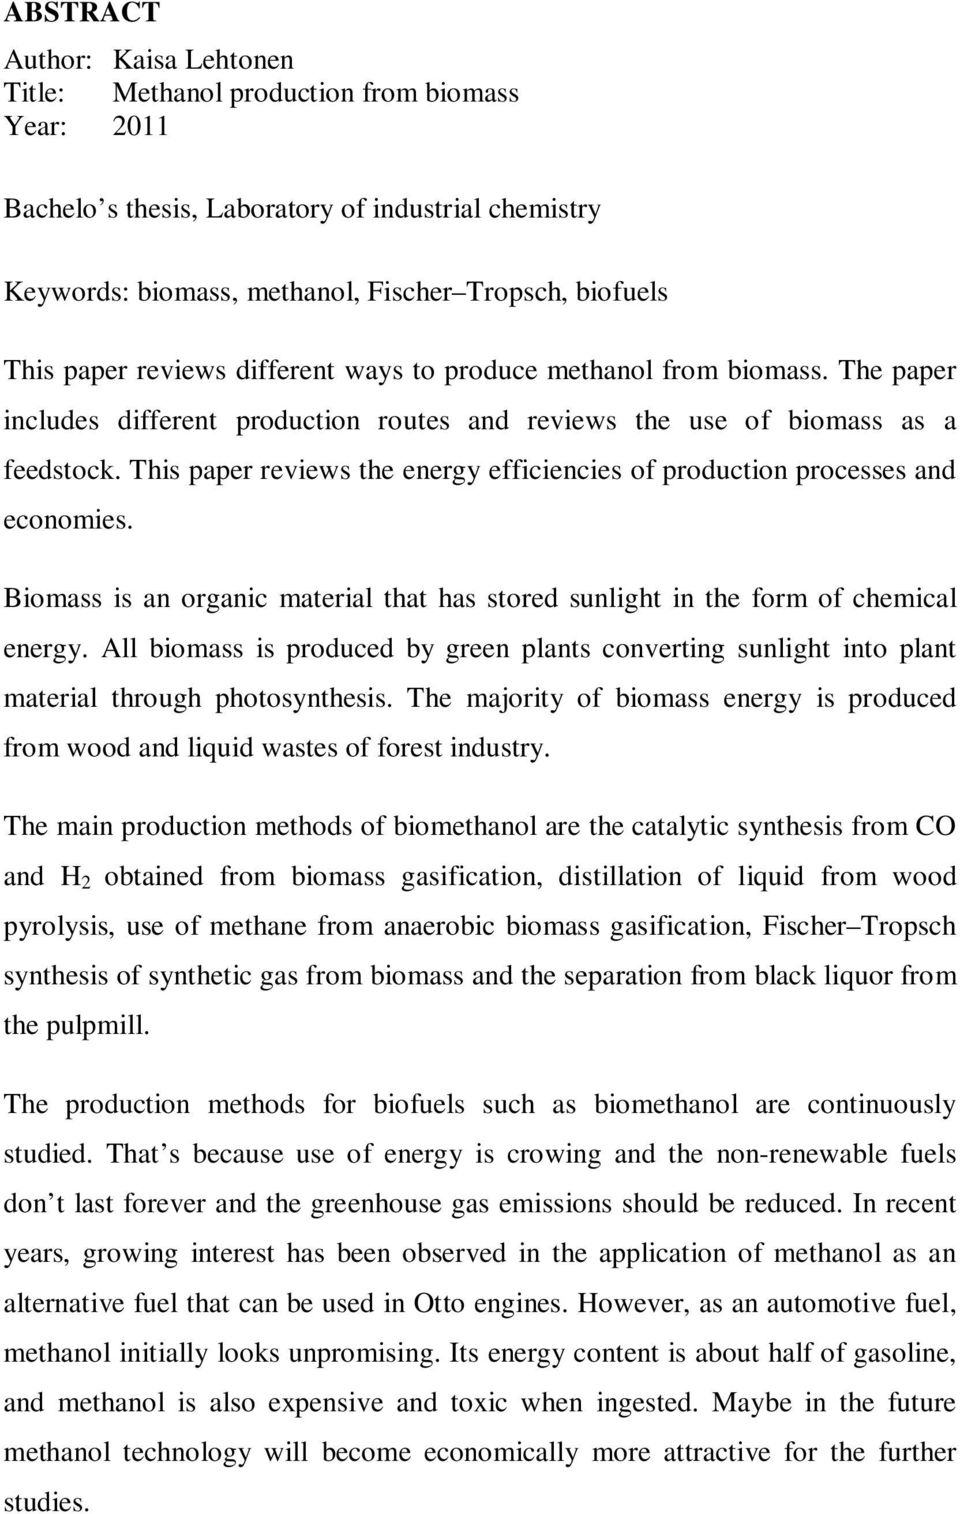 This paper reviews the energy efficiencies of production processes and economies. Biomass is an organic material that has stored sunlight in the form of chemical energy.